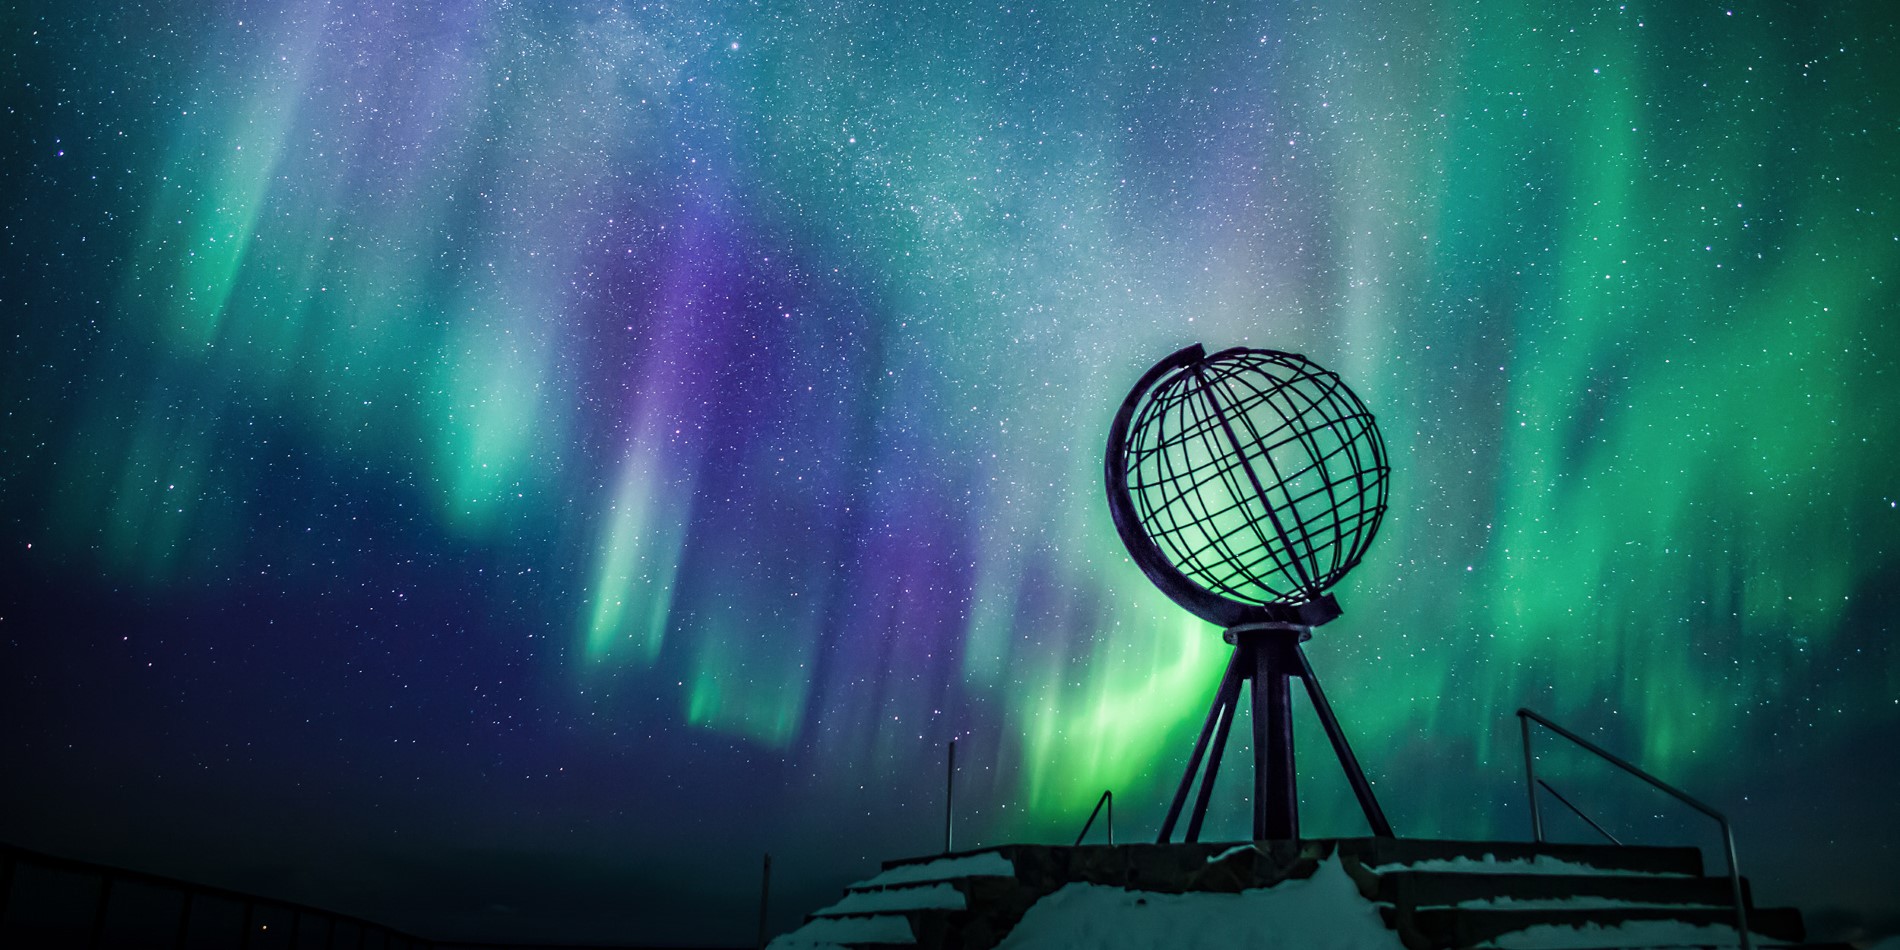 North Cape monument with blue and green northern lights in the background.